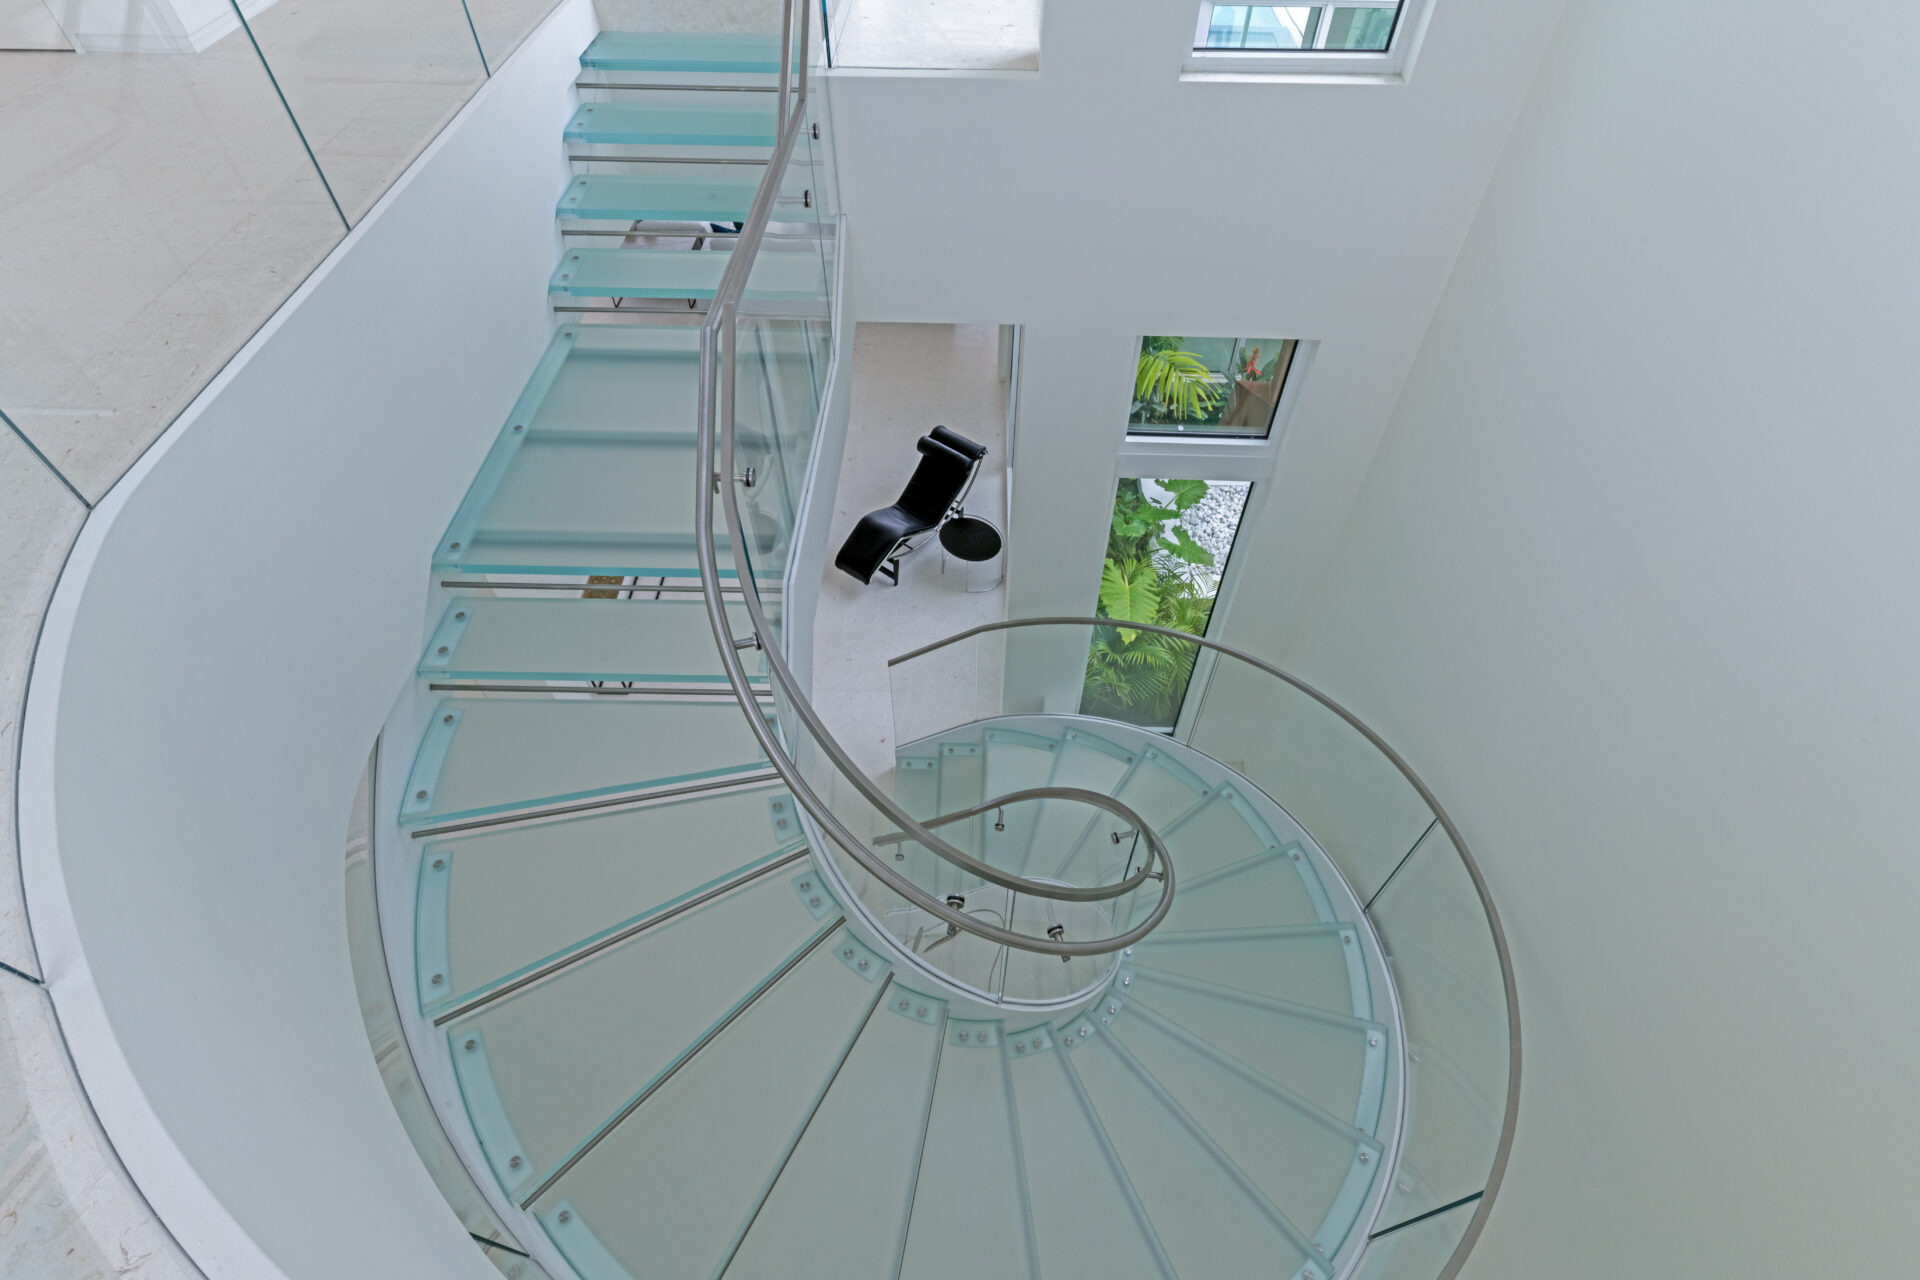 A spiral staircase with glass panels